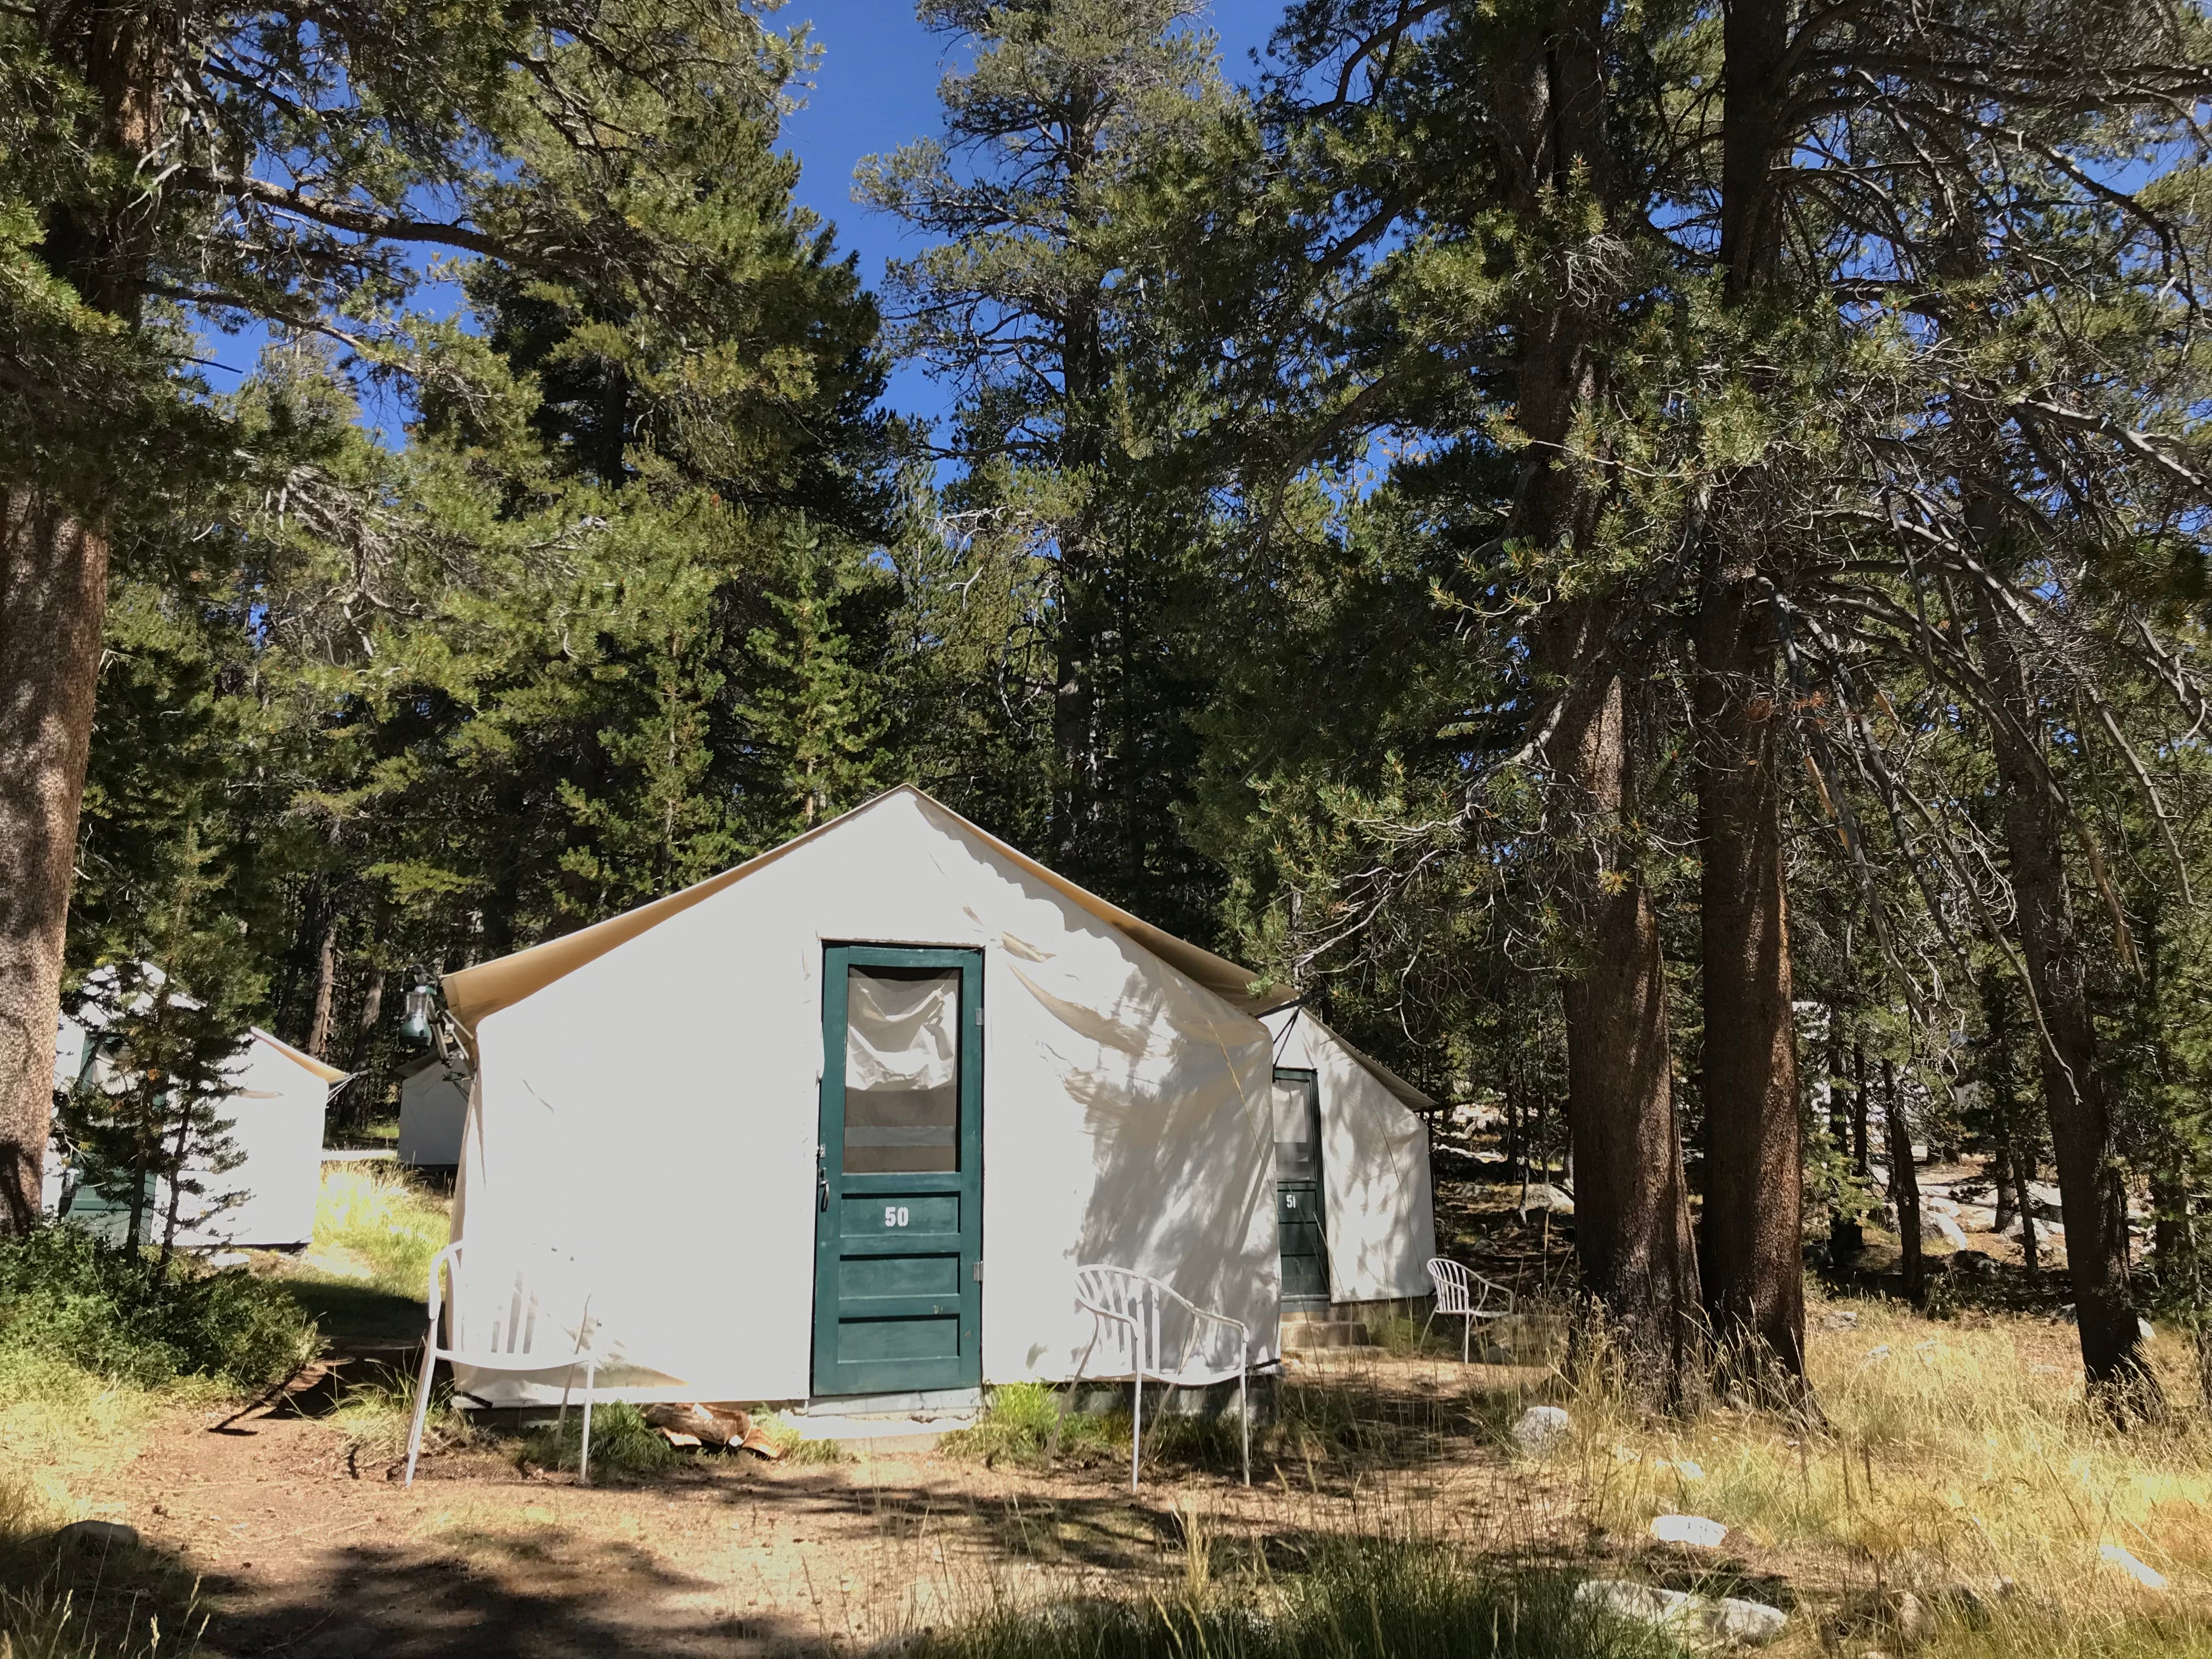 Camper submitted image from Tuolumne Meadows Lodge — Yosemite National Park - 4